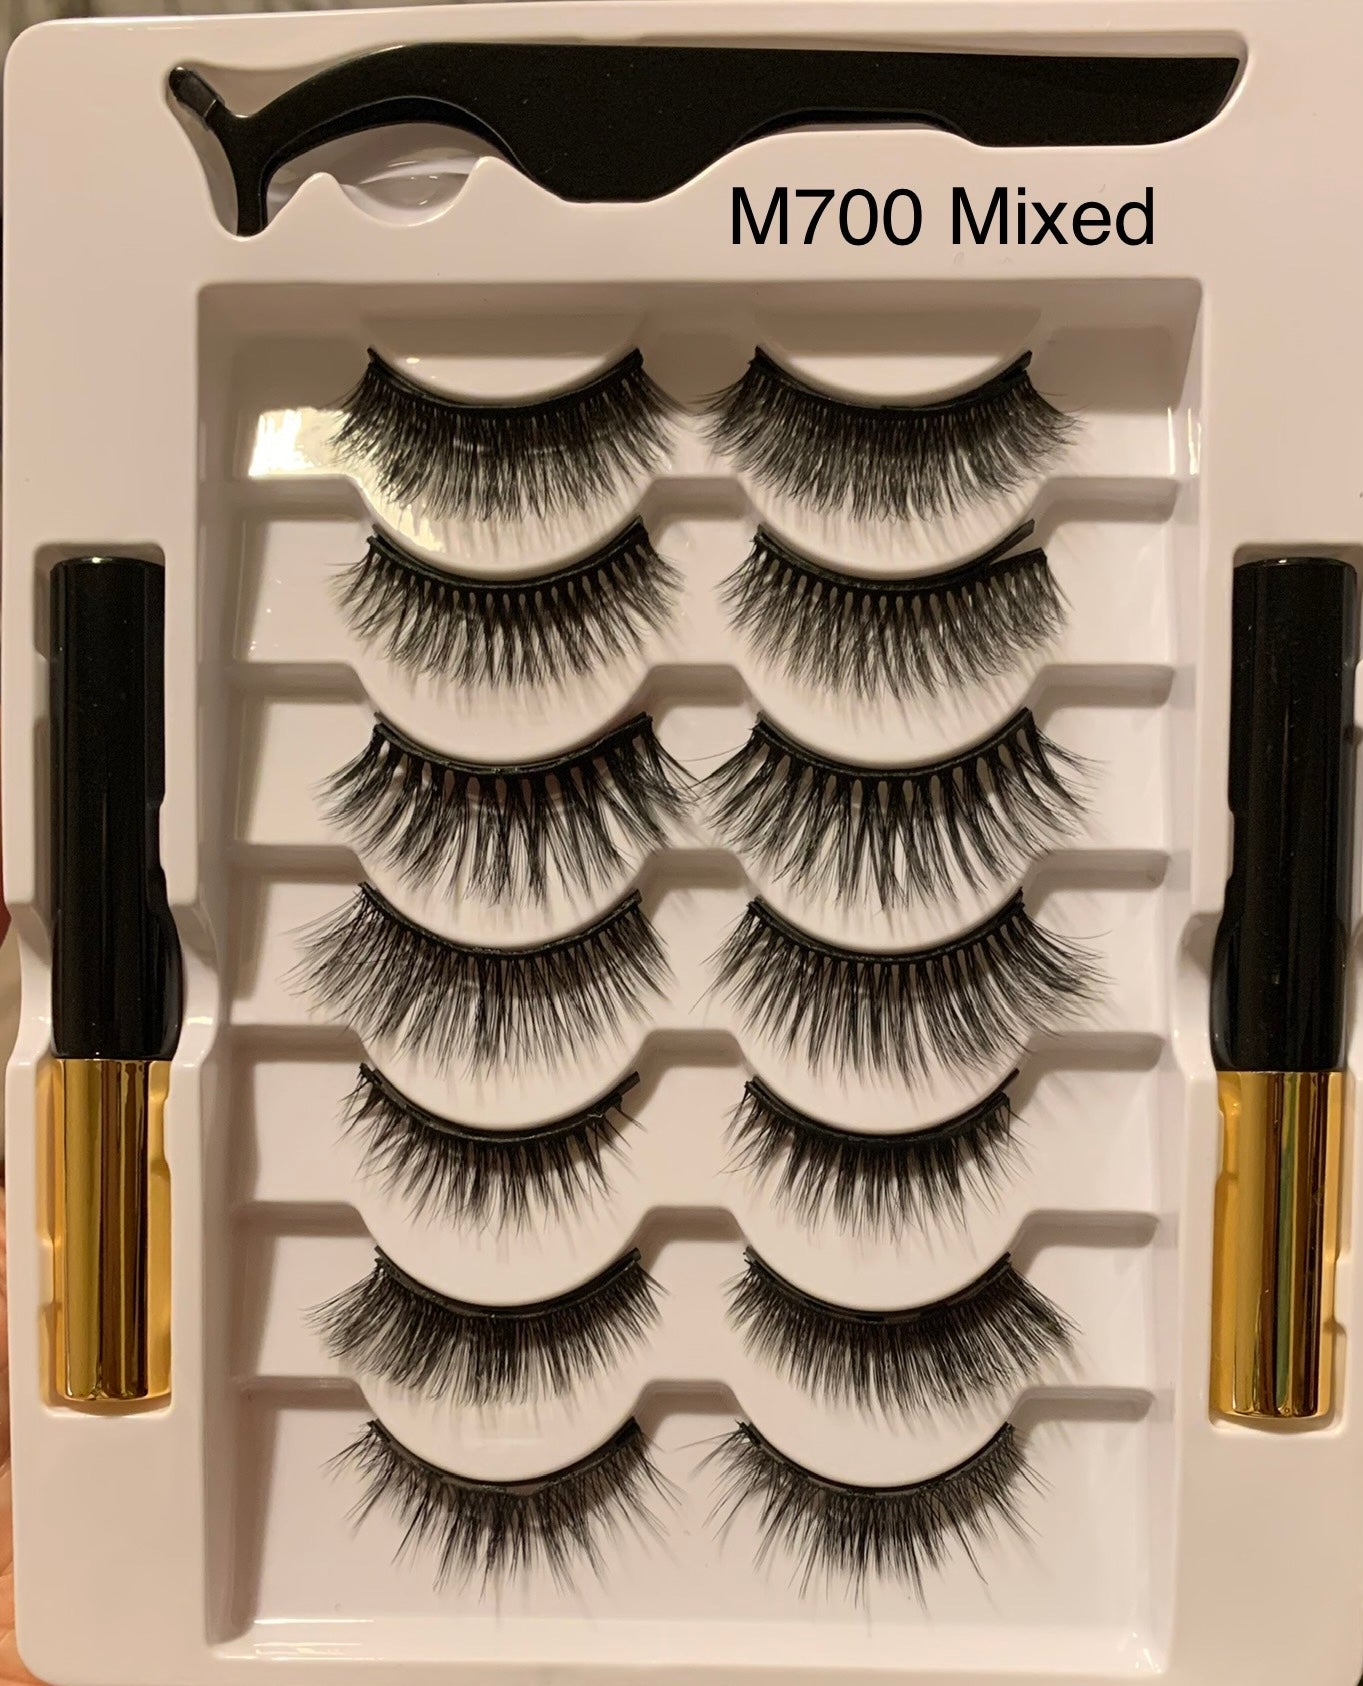 7 Magnetic Eyelashes Sets LIMITED TIME SPECIAL!! September Only